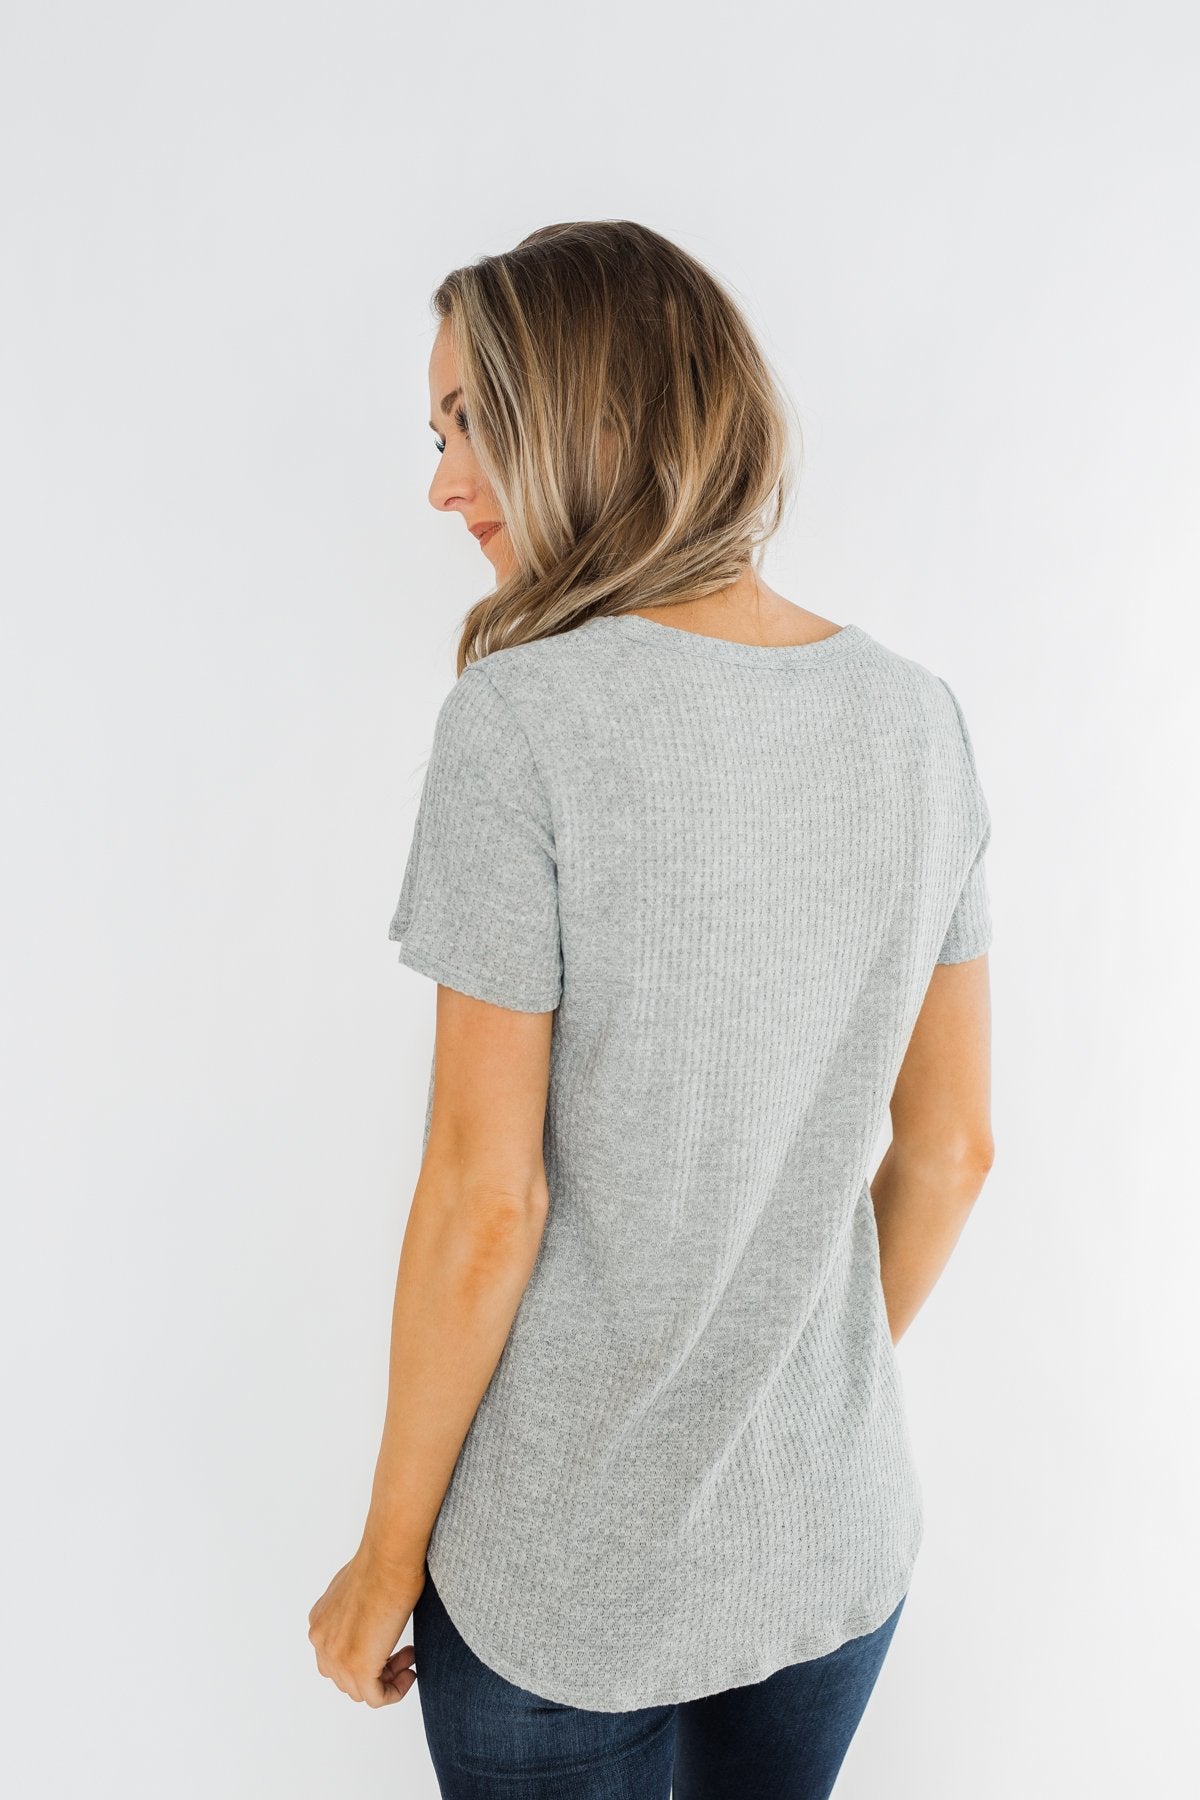 Up For An Adventure Striped Top- Heather Grey